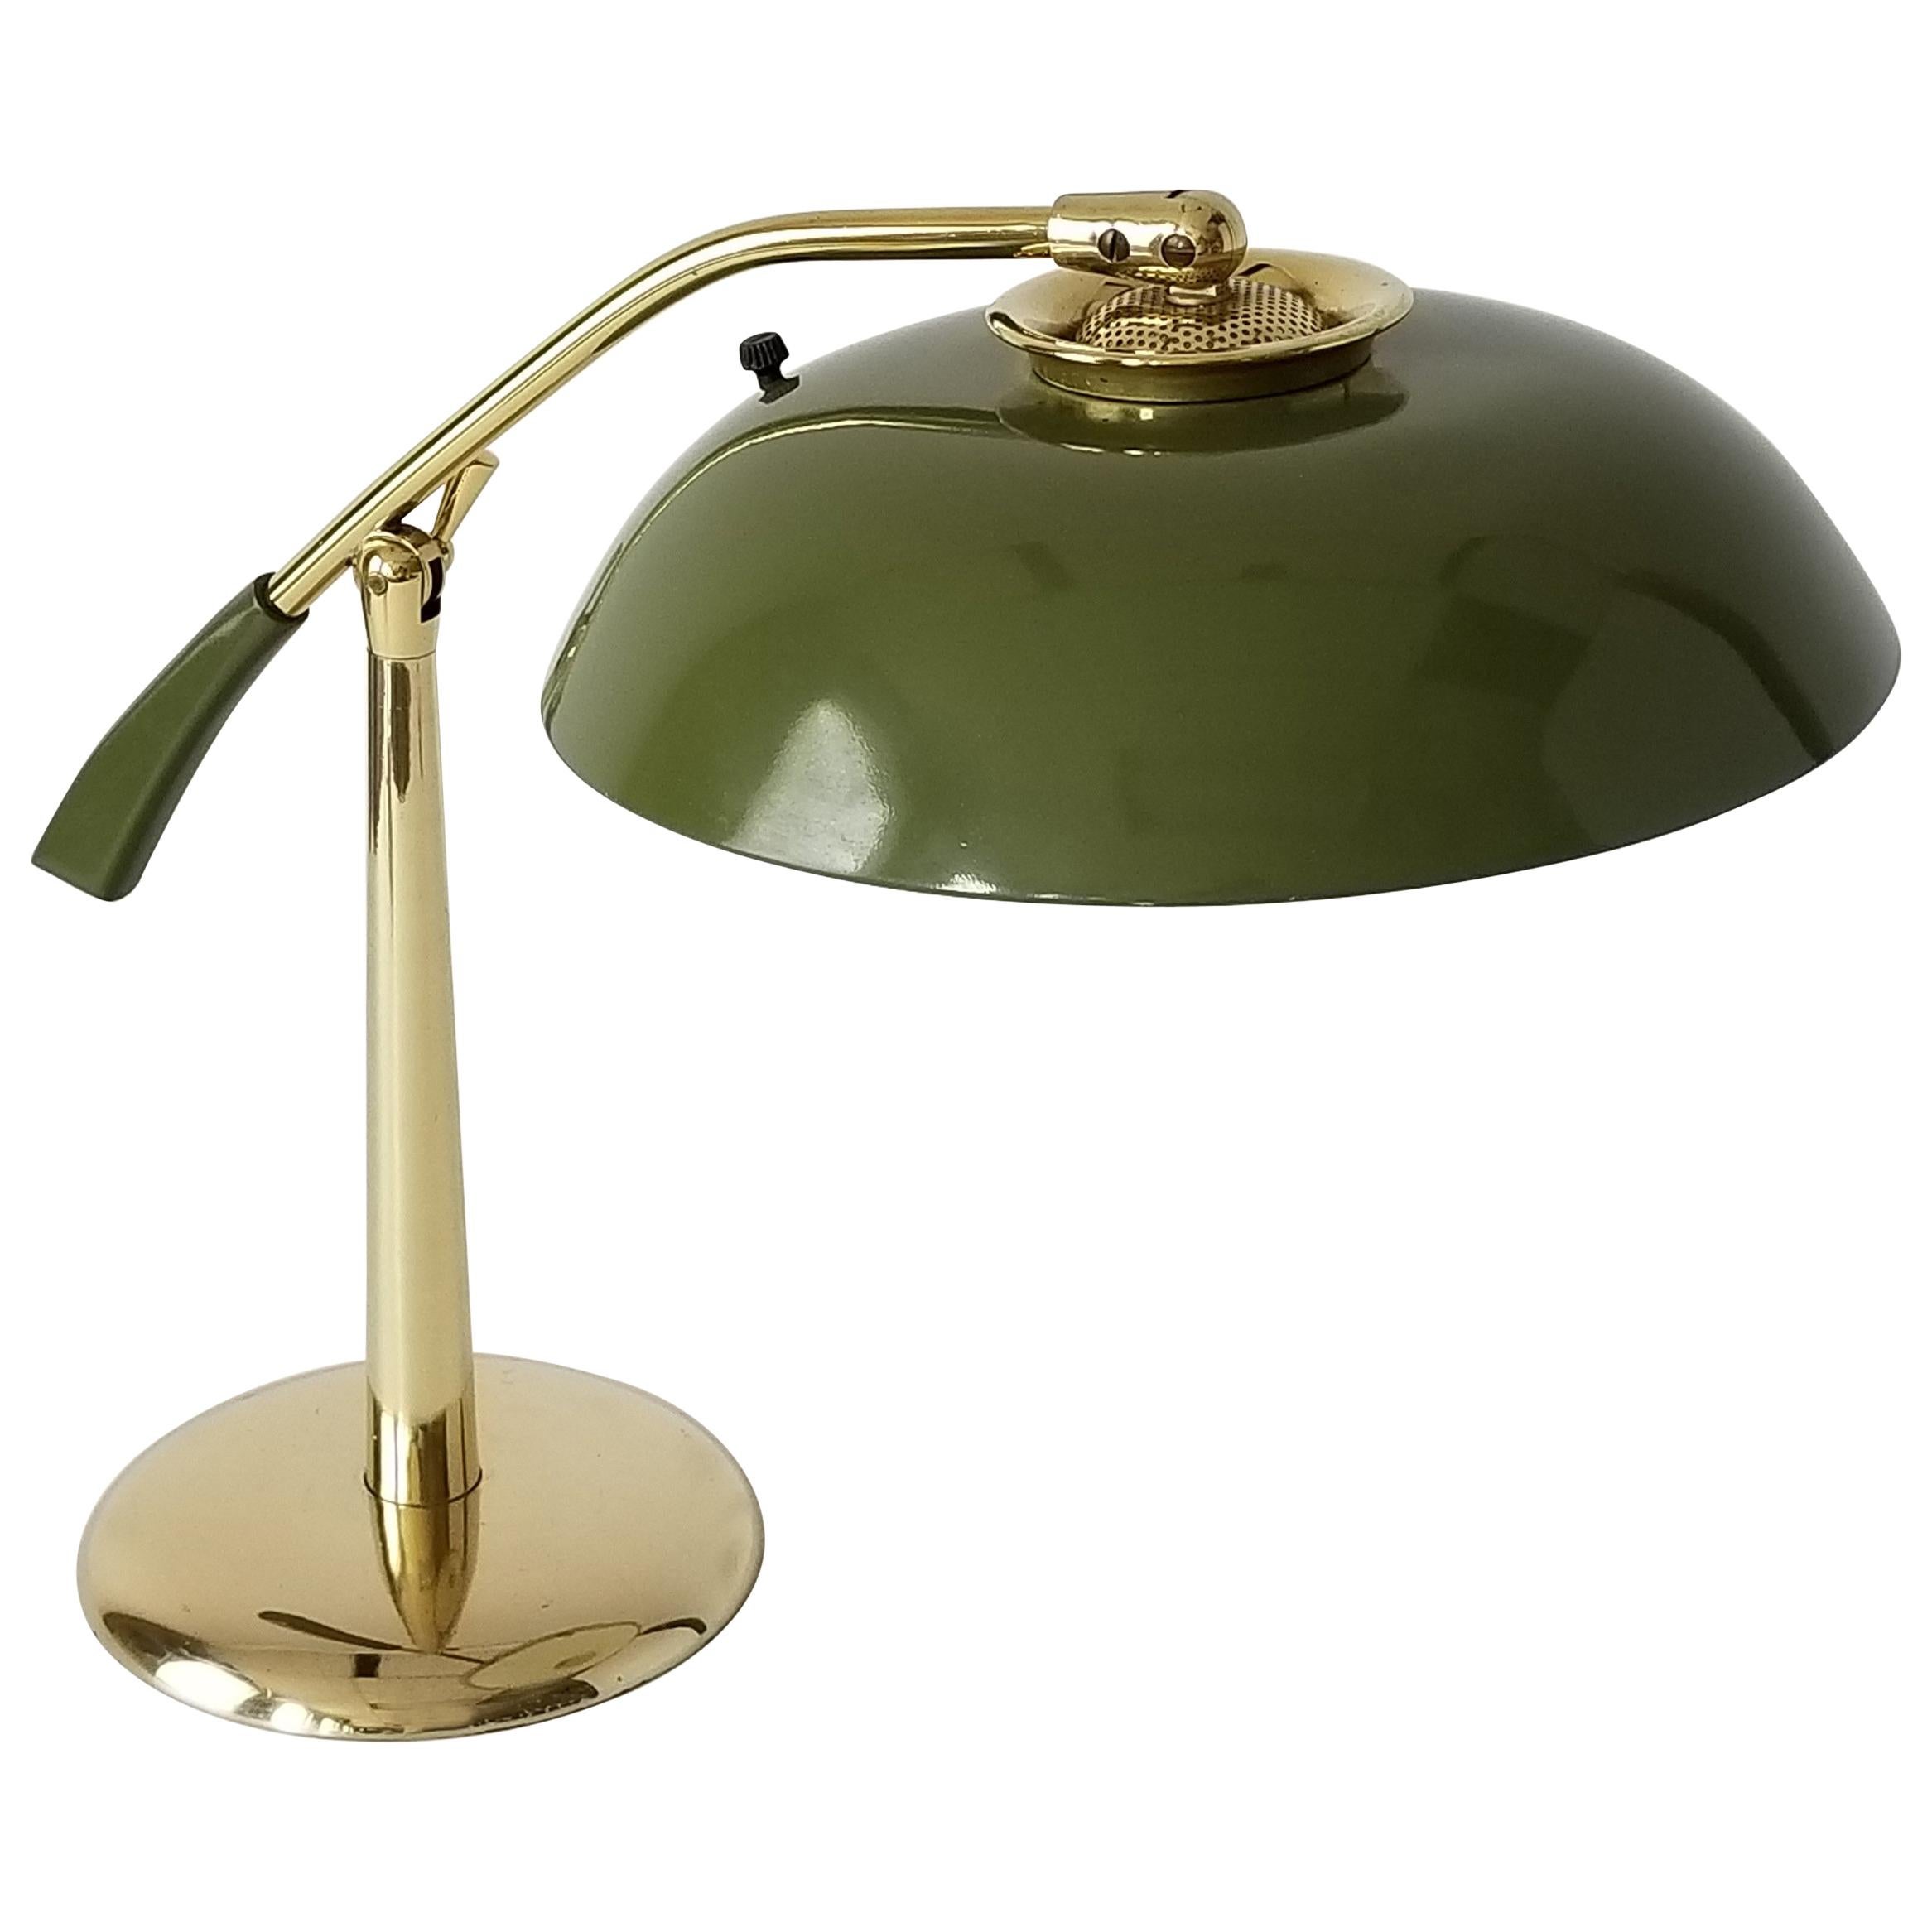 1950s Gerald Thurston Brass Table Lamp with Enameled Shade, USA